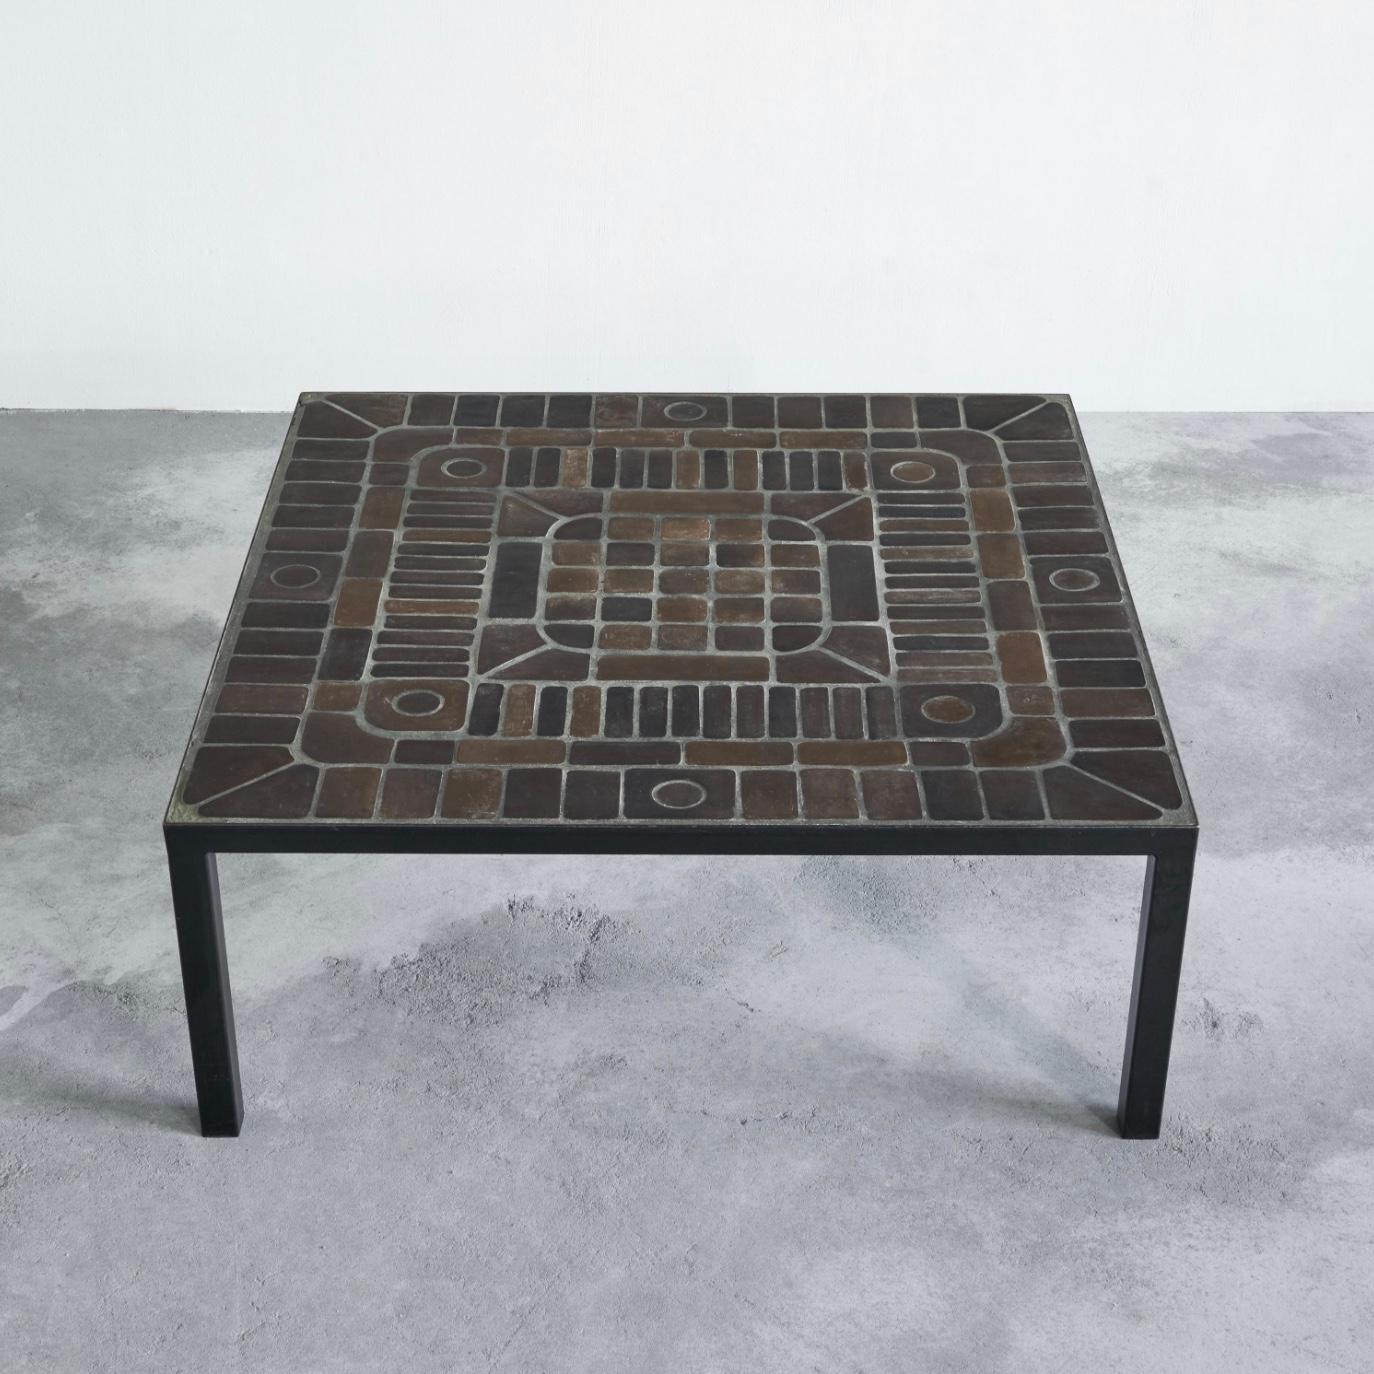 Coffee table in ceramic tiles and metal, Belgium, 1960s.

This is a truly wonderful mid-century coffee table in ceramic tiles and metal. An almost certain Belgian made table, since the original owners bought it in a high-end Belgian furniture store